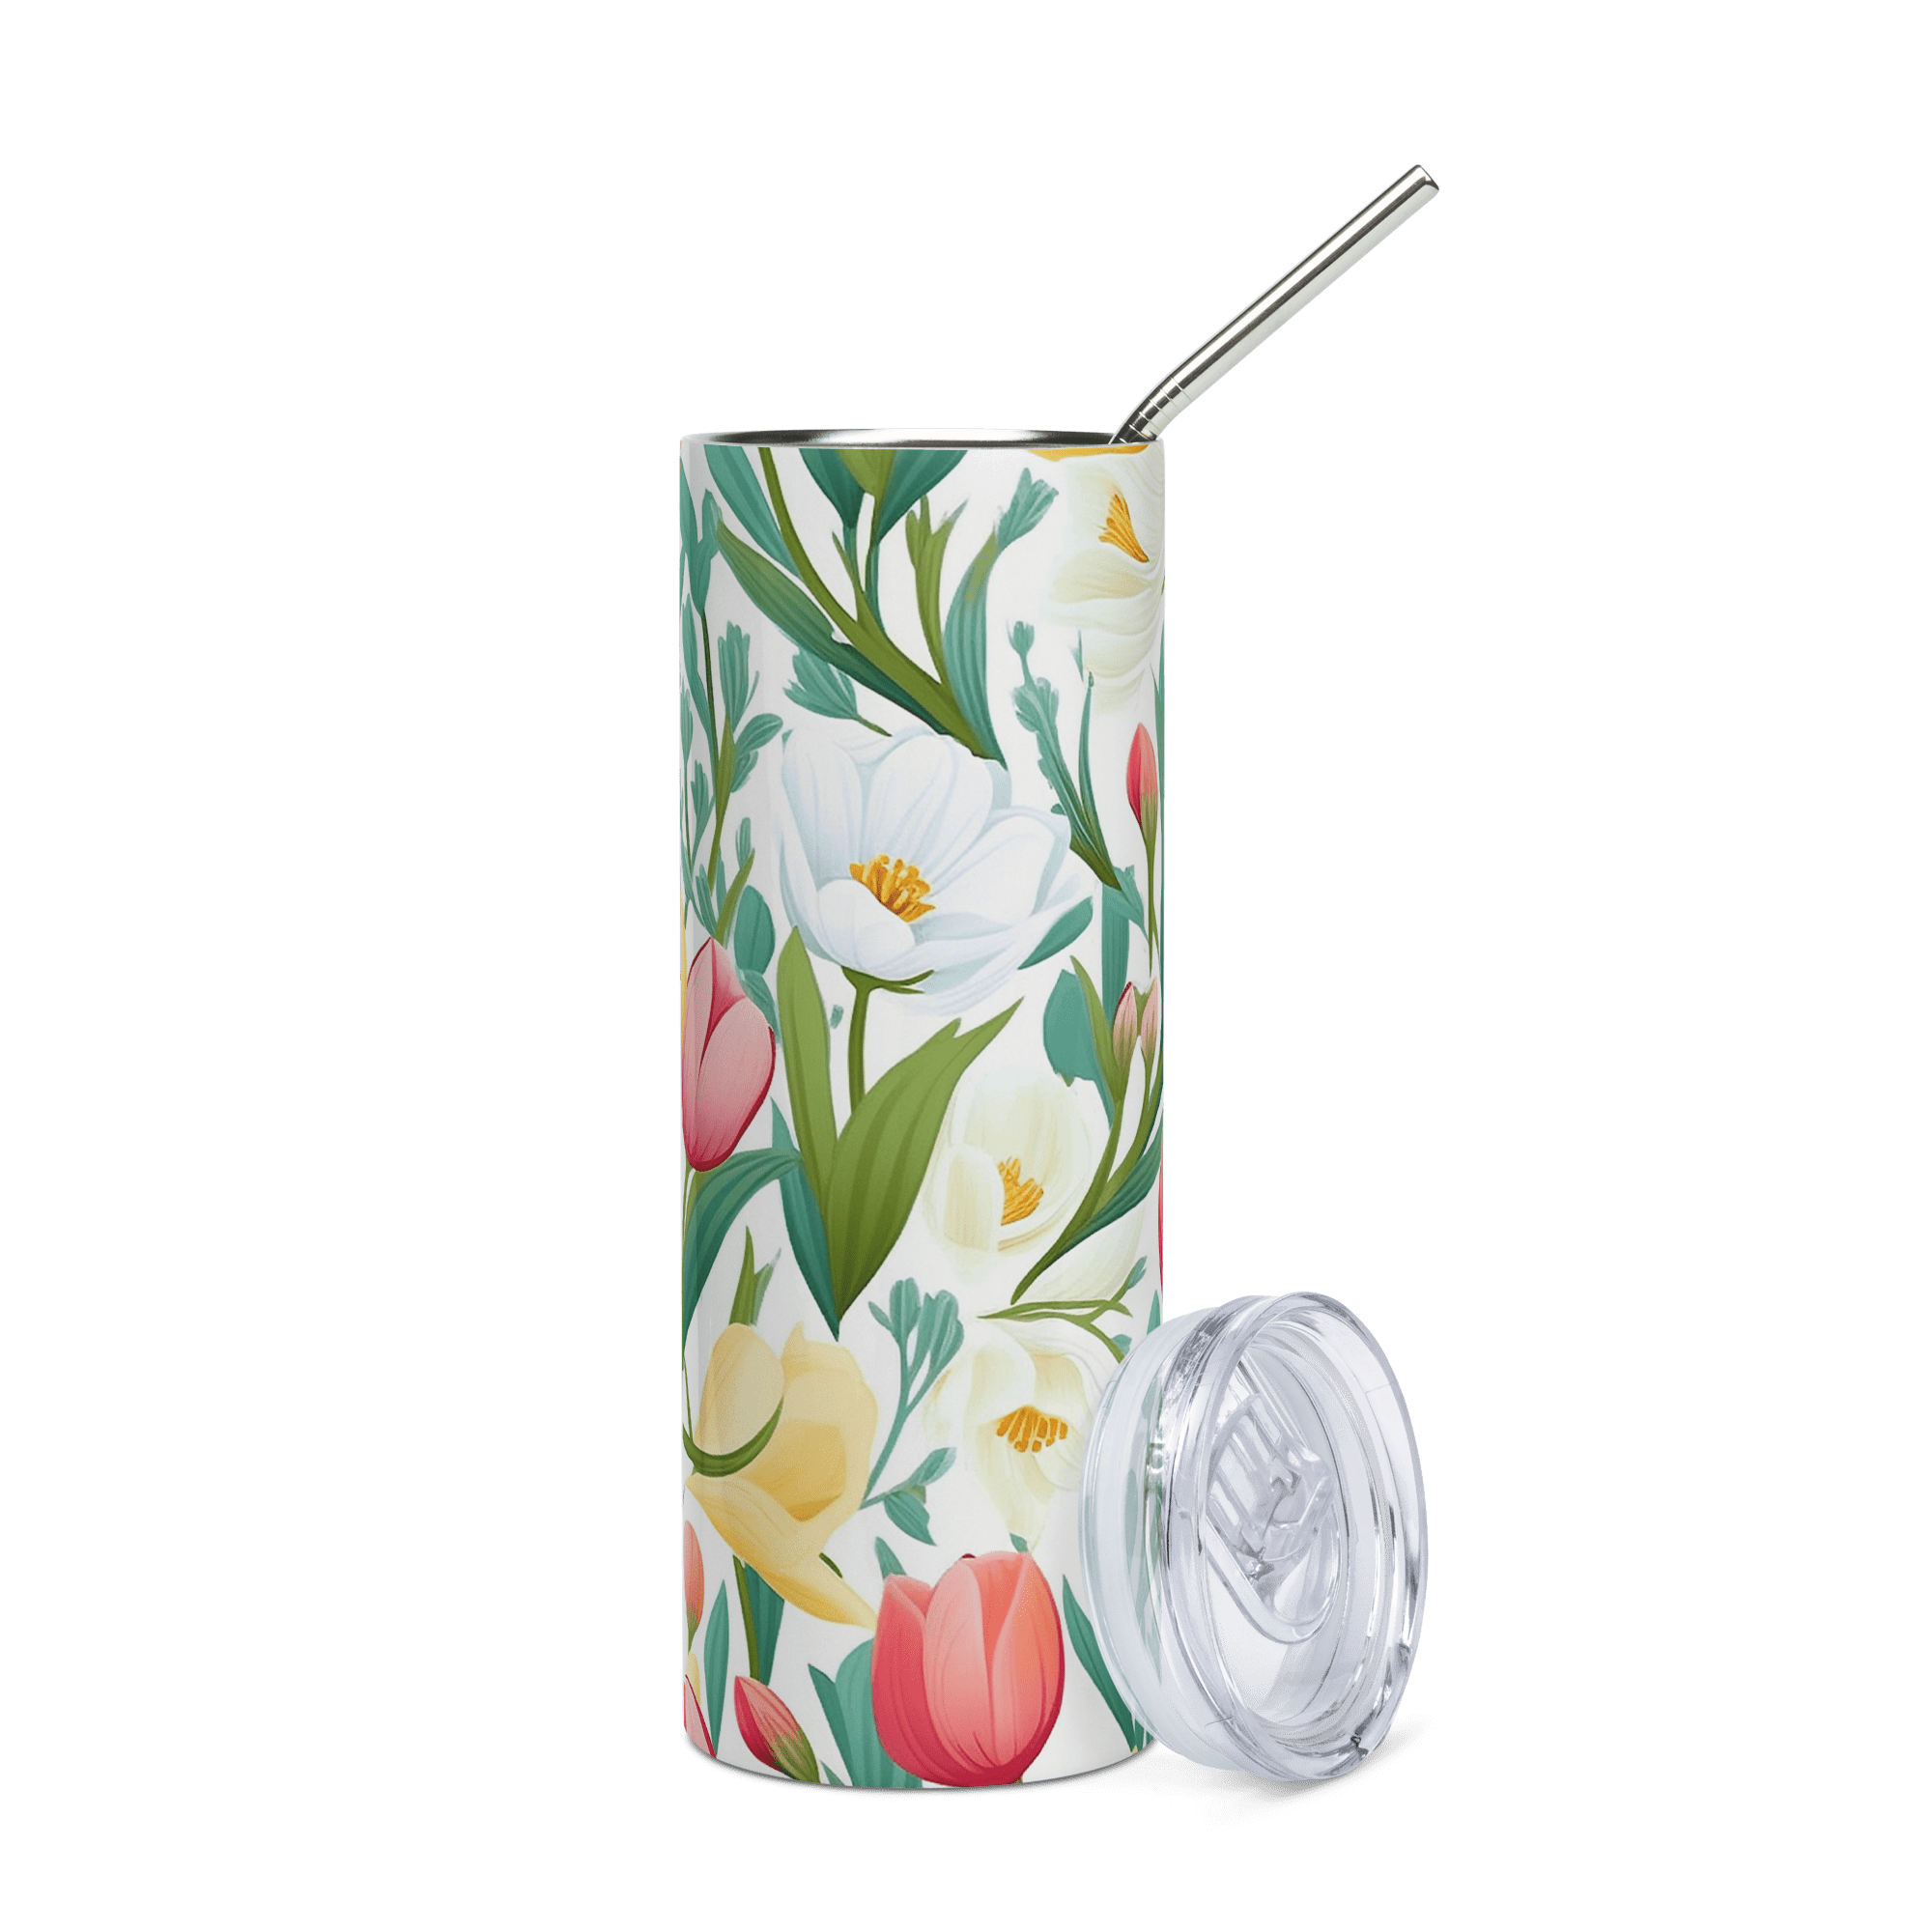 Springtime Floral - 20oz. Tumbler with Stainless Steel Straw